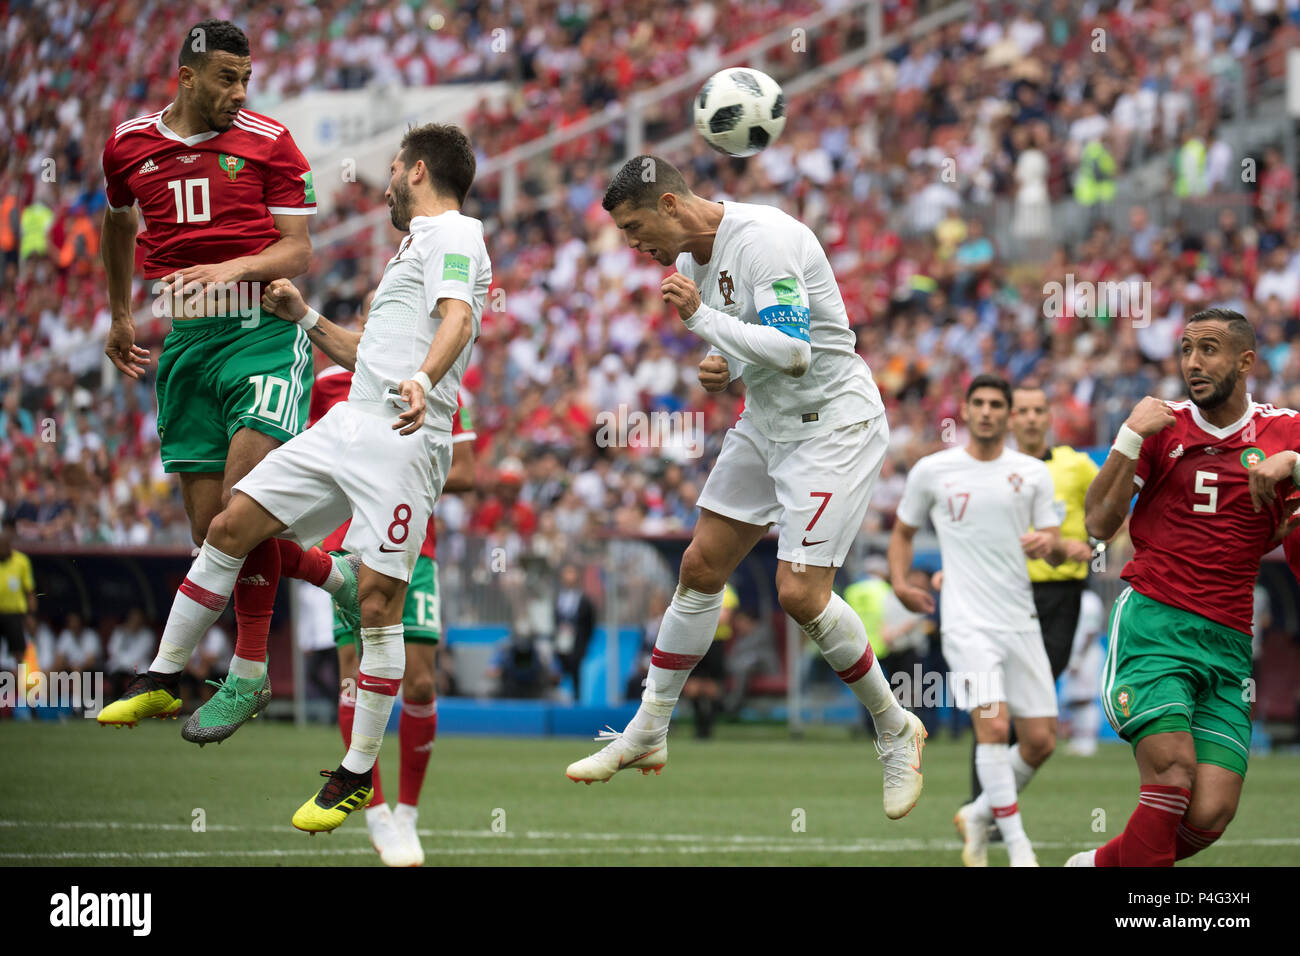 Moscow, Soccer, Russia. 20th June, 2018. World Cup, Portugal vs Morocco, preliminary round, Group B, 2nd match day in the Luzhniki Stadium: Portugal's Joao Moutinho (C) and Cristiano Ronaldo (R) and Morocco's Younes Belhanda (L) vying for the ball. Credit: Federico Gambarini/dpa/Alamy Live News Stock Photo